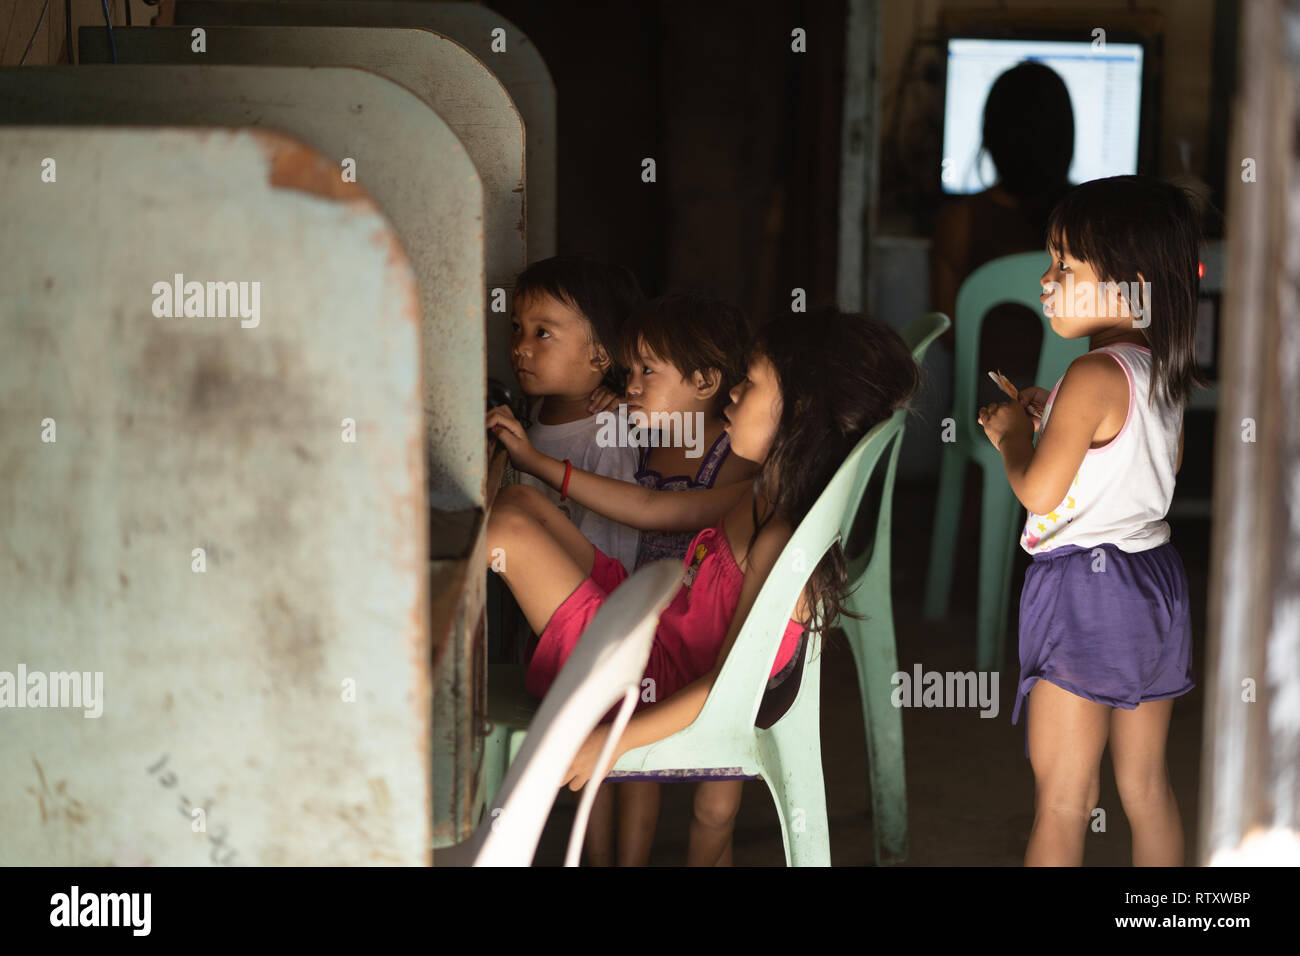 Concept image of children in third world poverty being in a vulnerable situation when using the Internet. Stock Photo